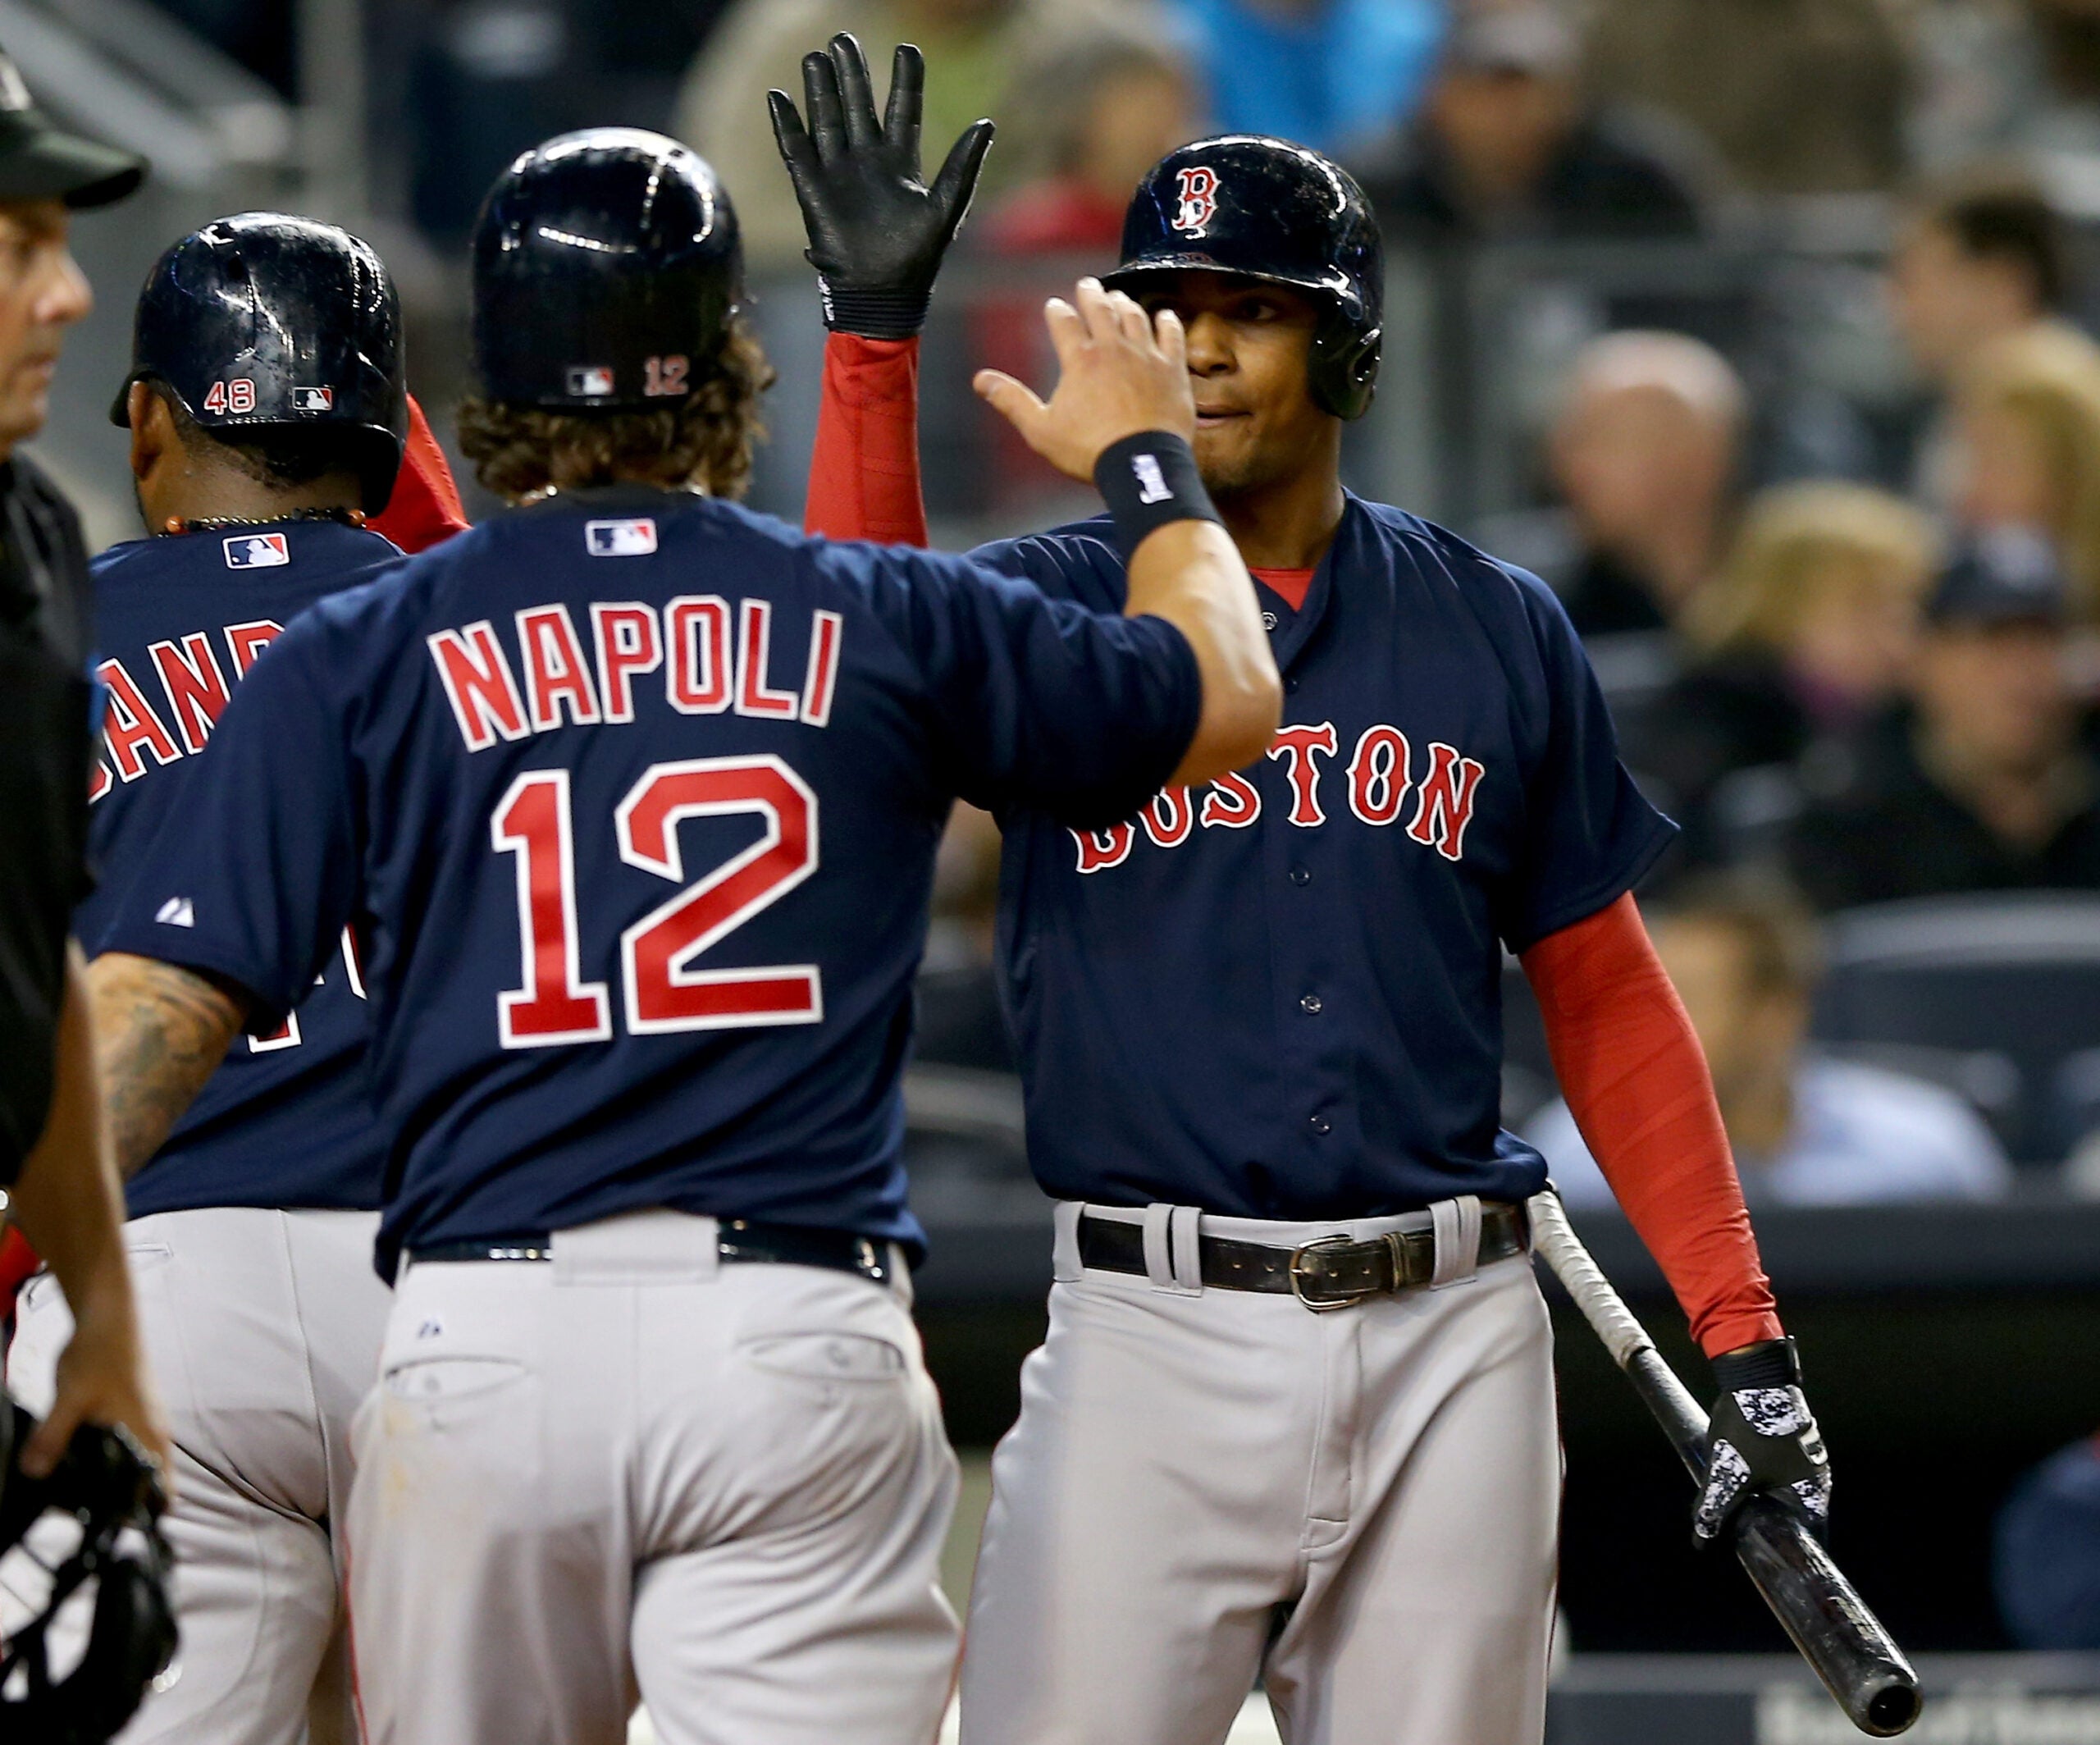 Boston Red Sox win 6-5 after longest game in franchise history